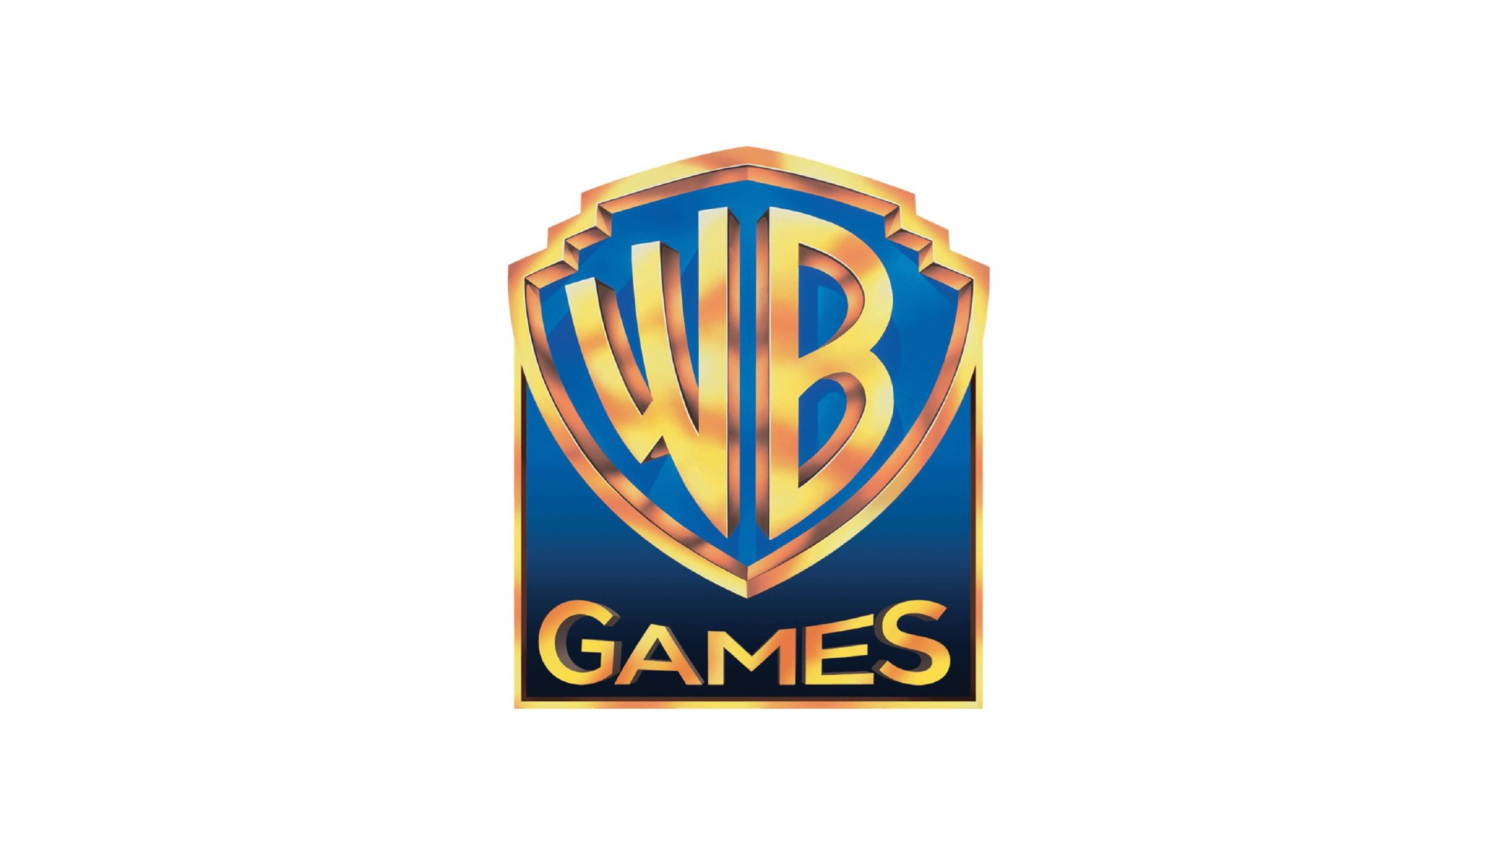 WB Games delivers strong operating margins and high ROIs, has been  profitable for last 15 years